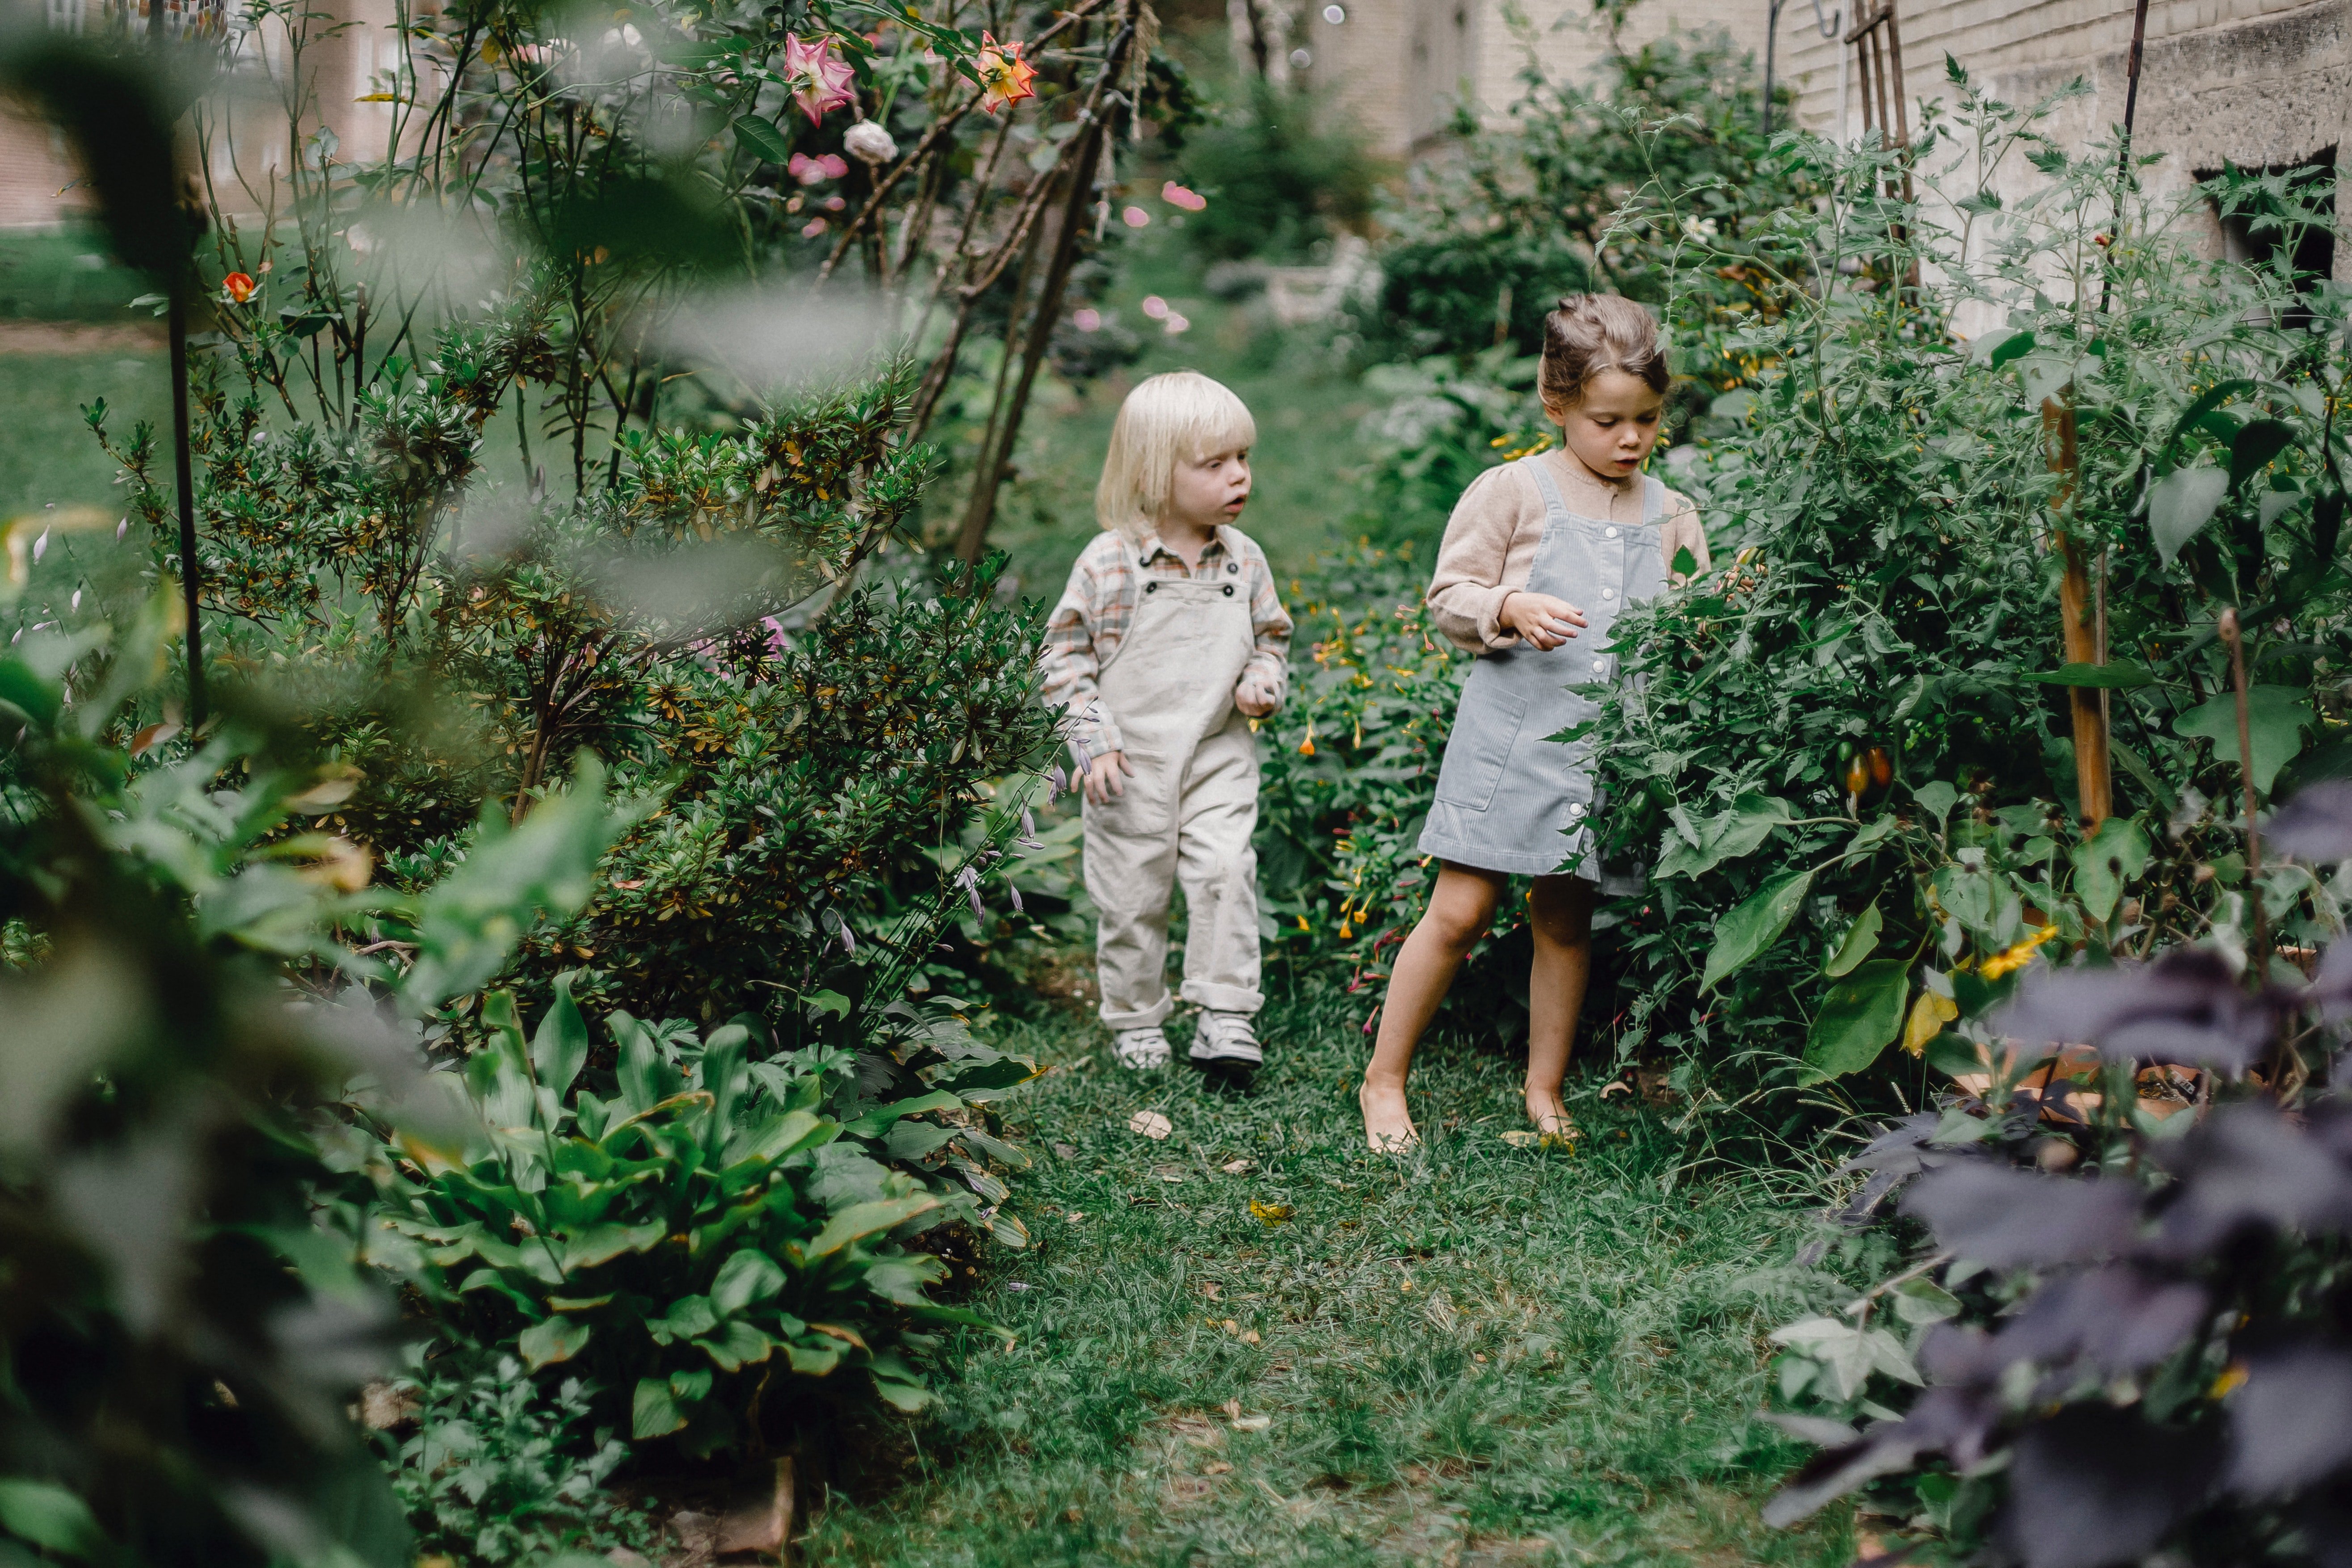 Beth and Lily often helped Victor with his garden. | Source: Pexels